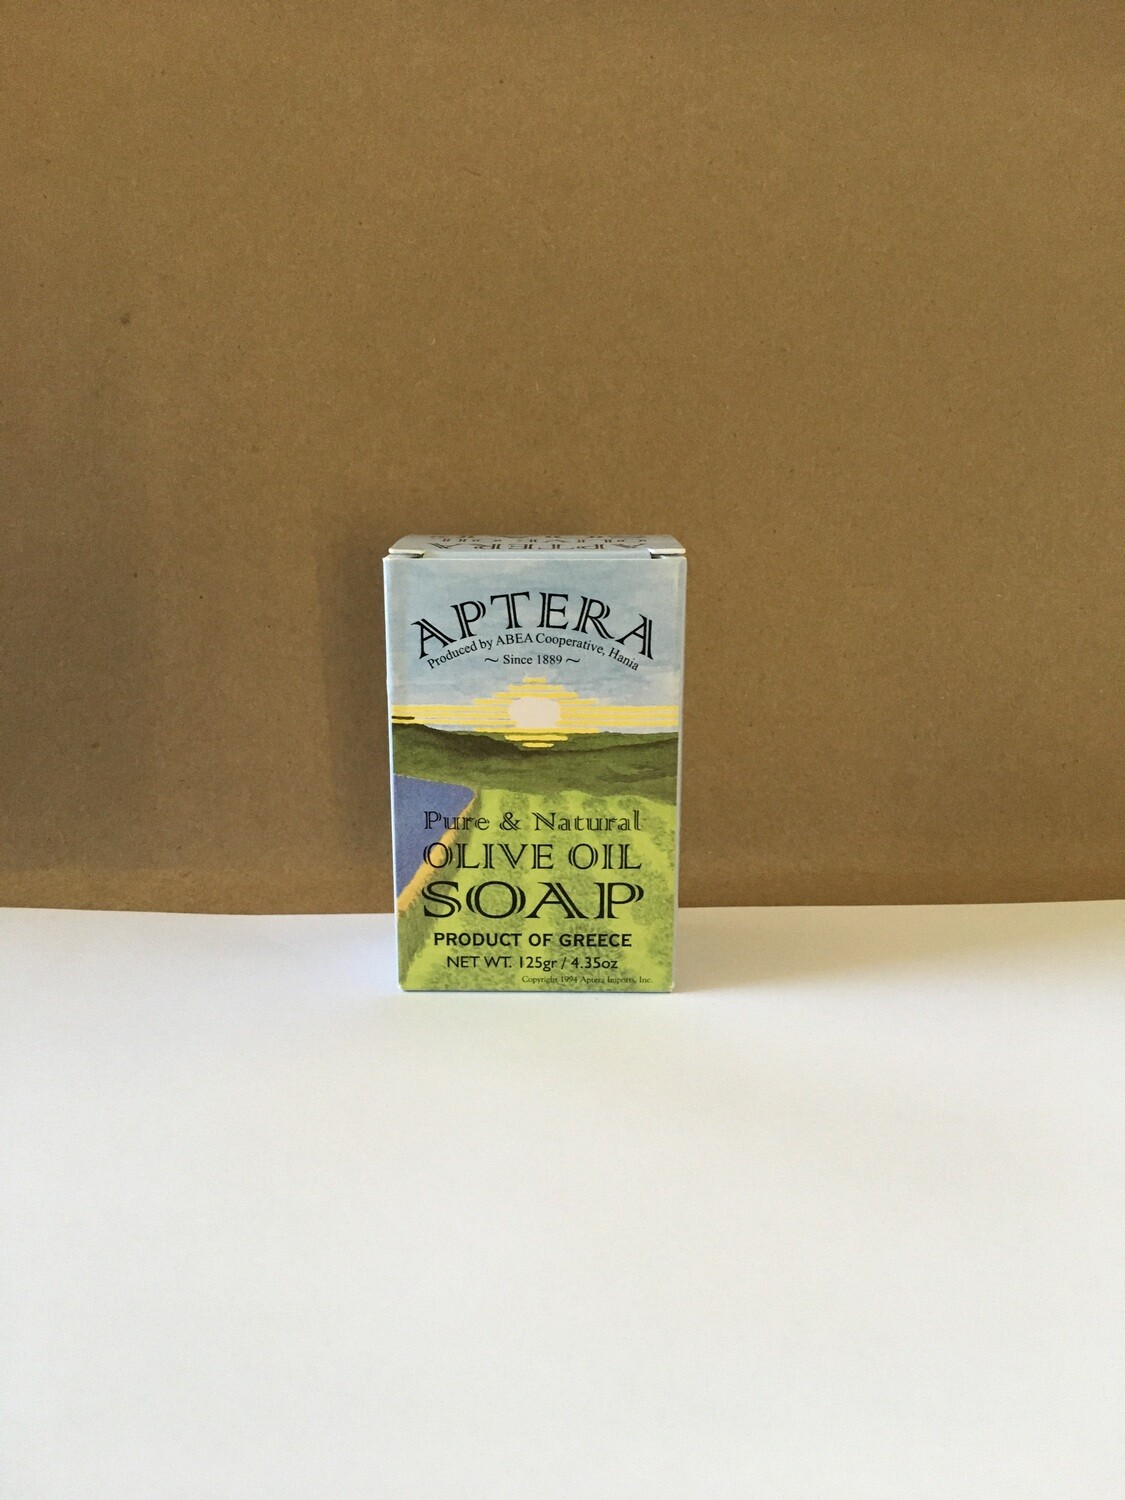 Health and Beauty / Soap / Aptera Olive Oil Soap